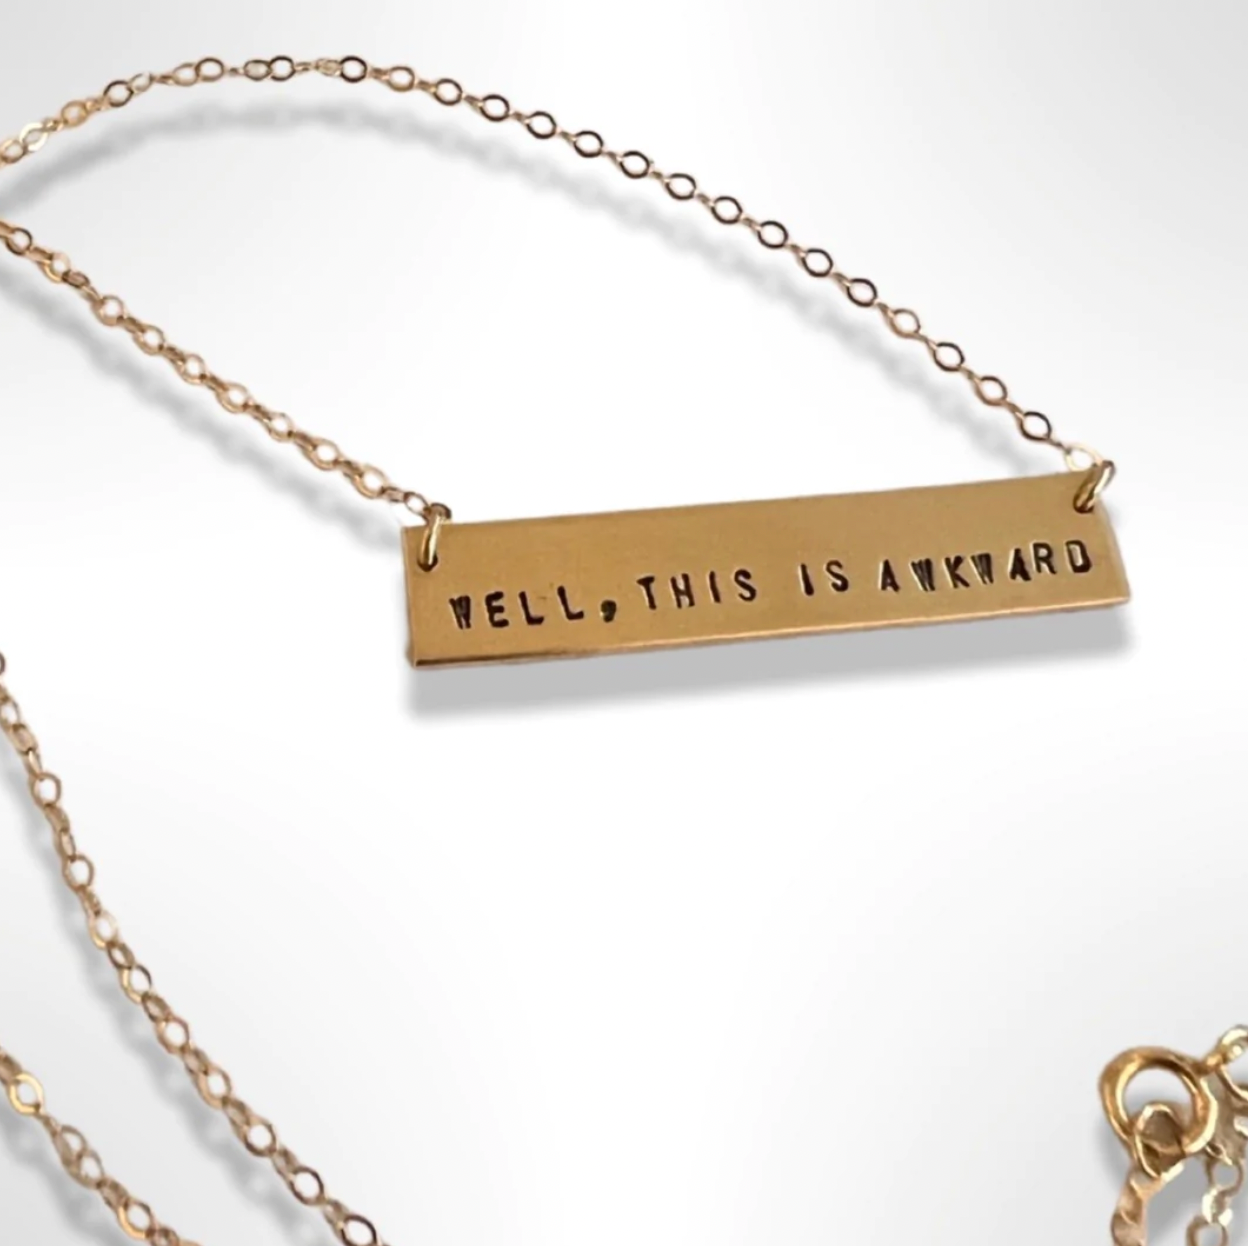 Lux + Luca Jewelry Co. Well This is Awkward Bar Necklace